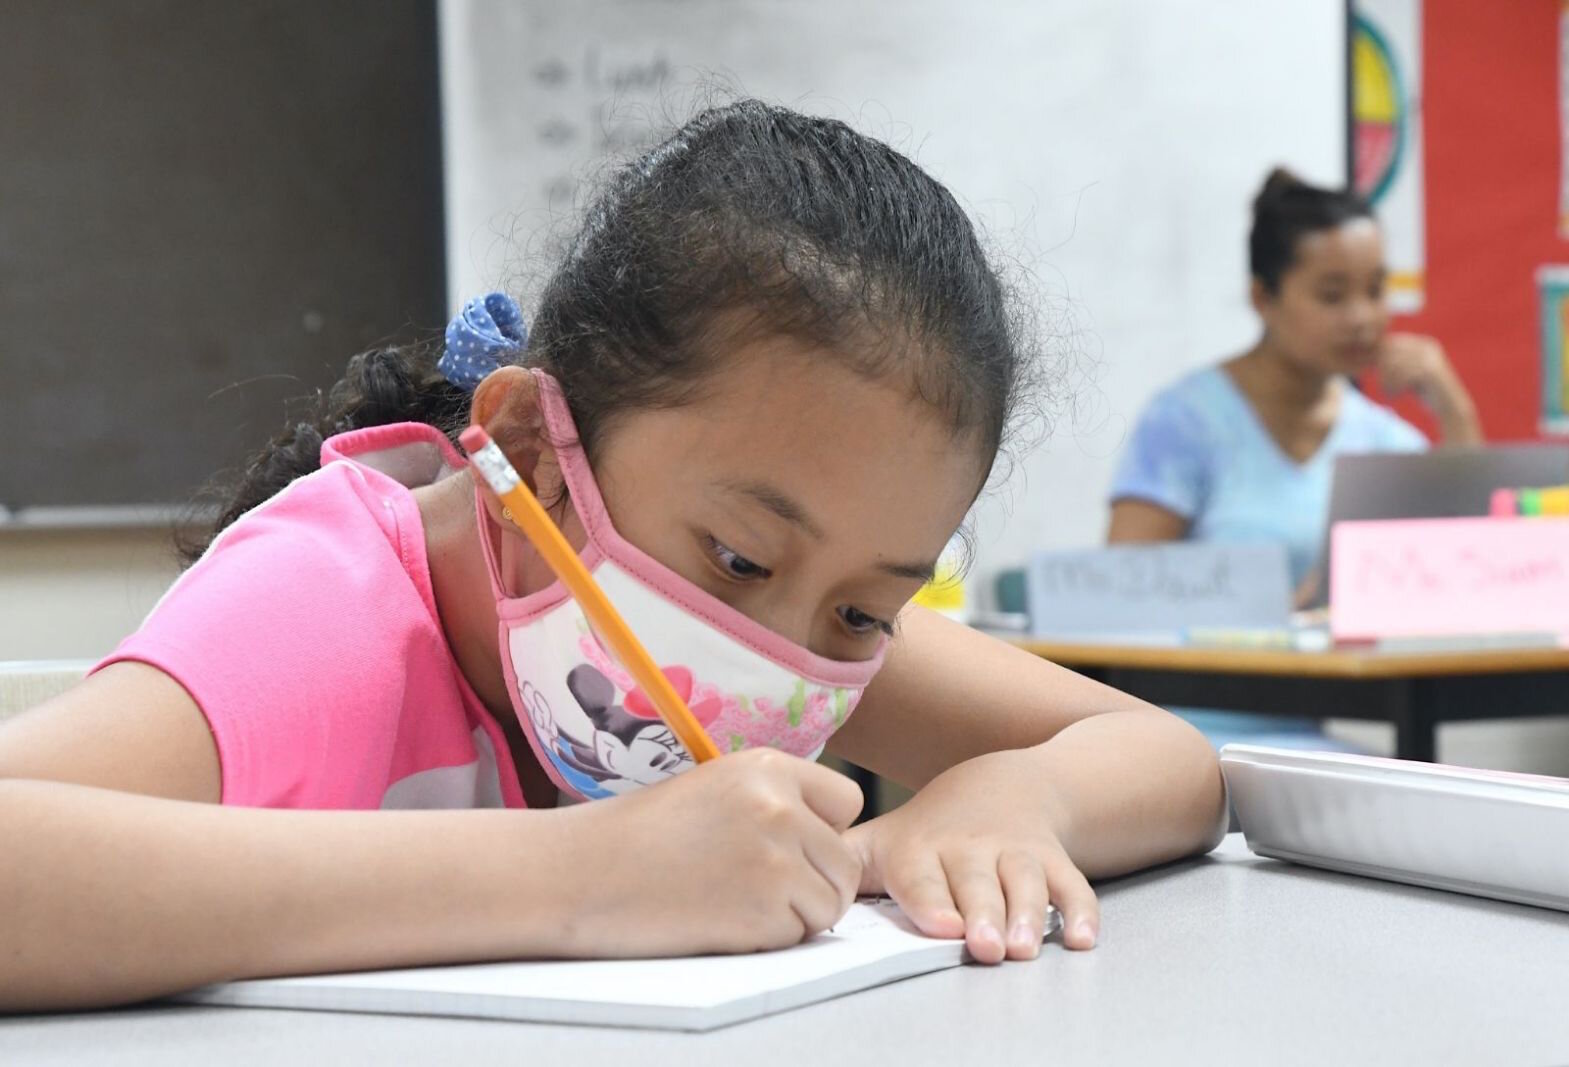 hian Mawi, 9, works on a project during a summer school session at the Burma Center.